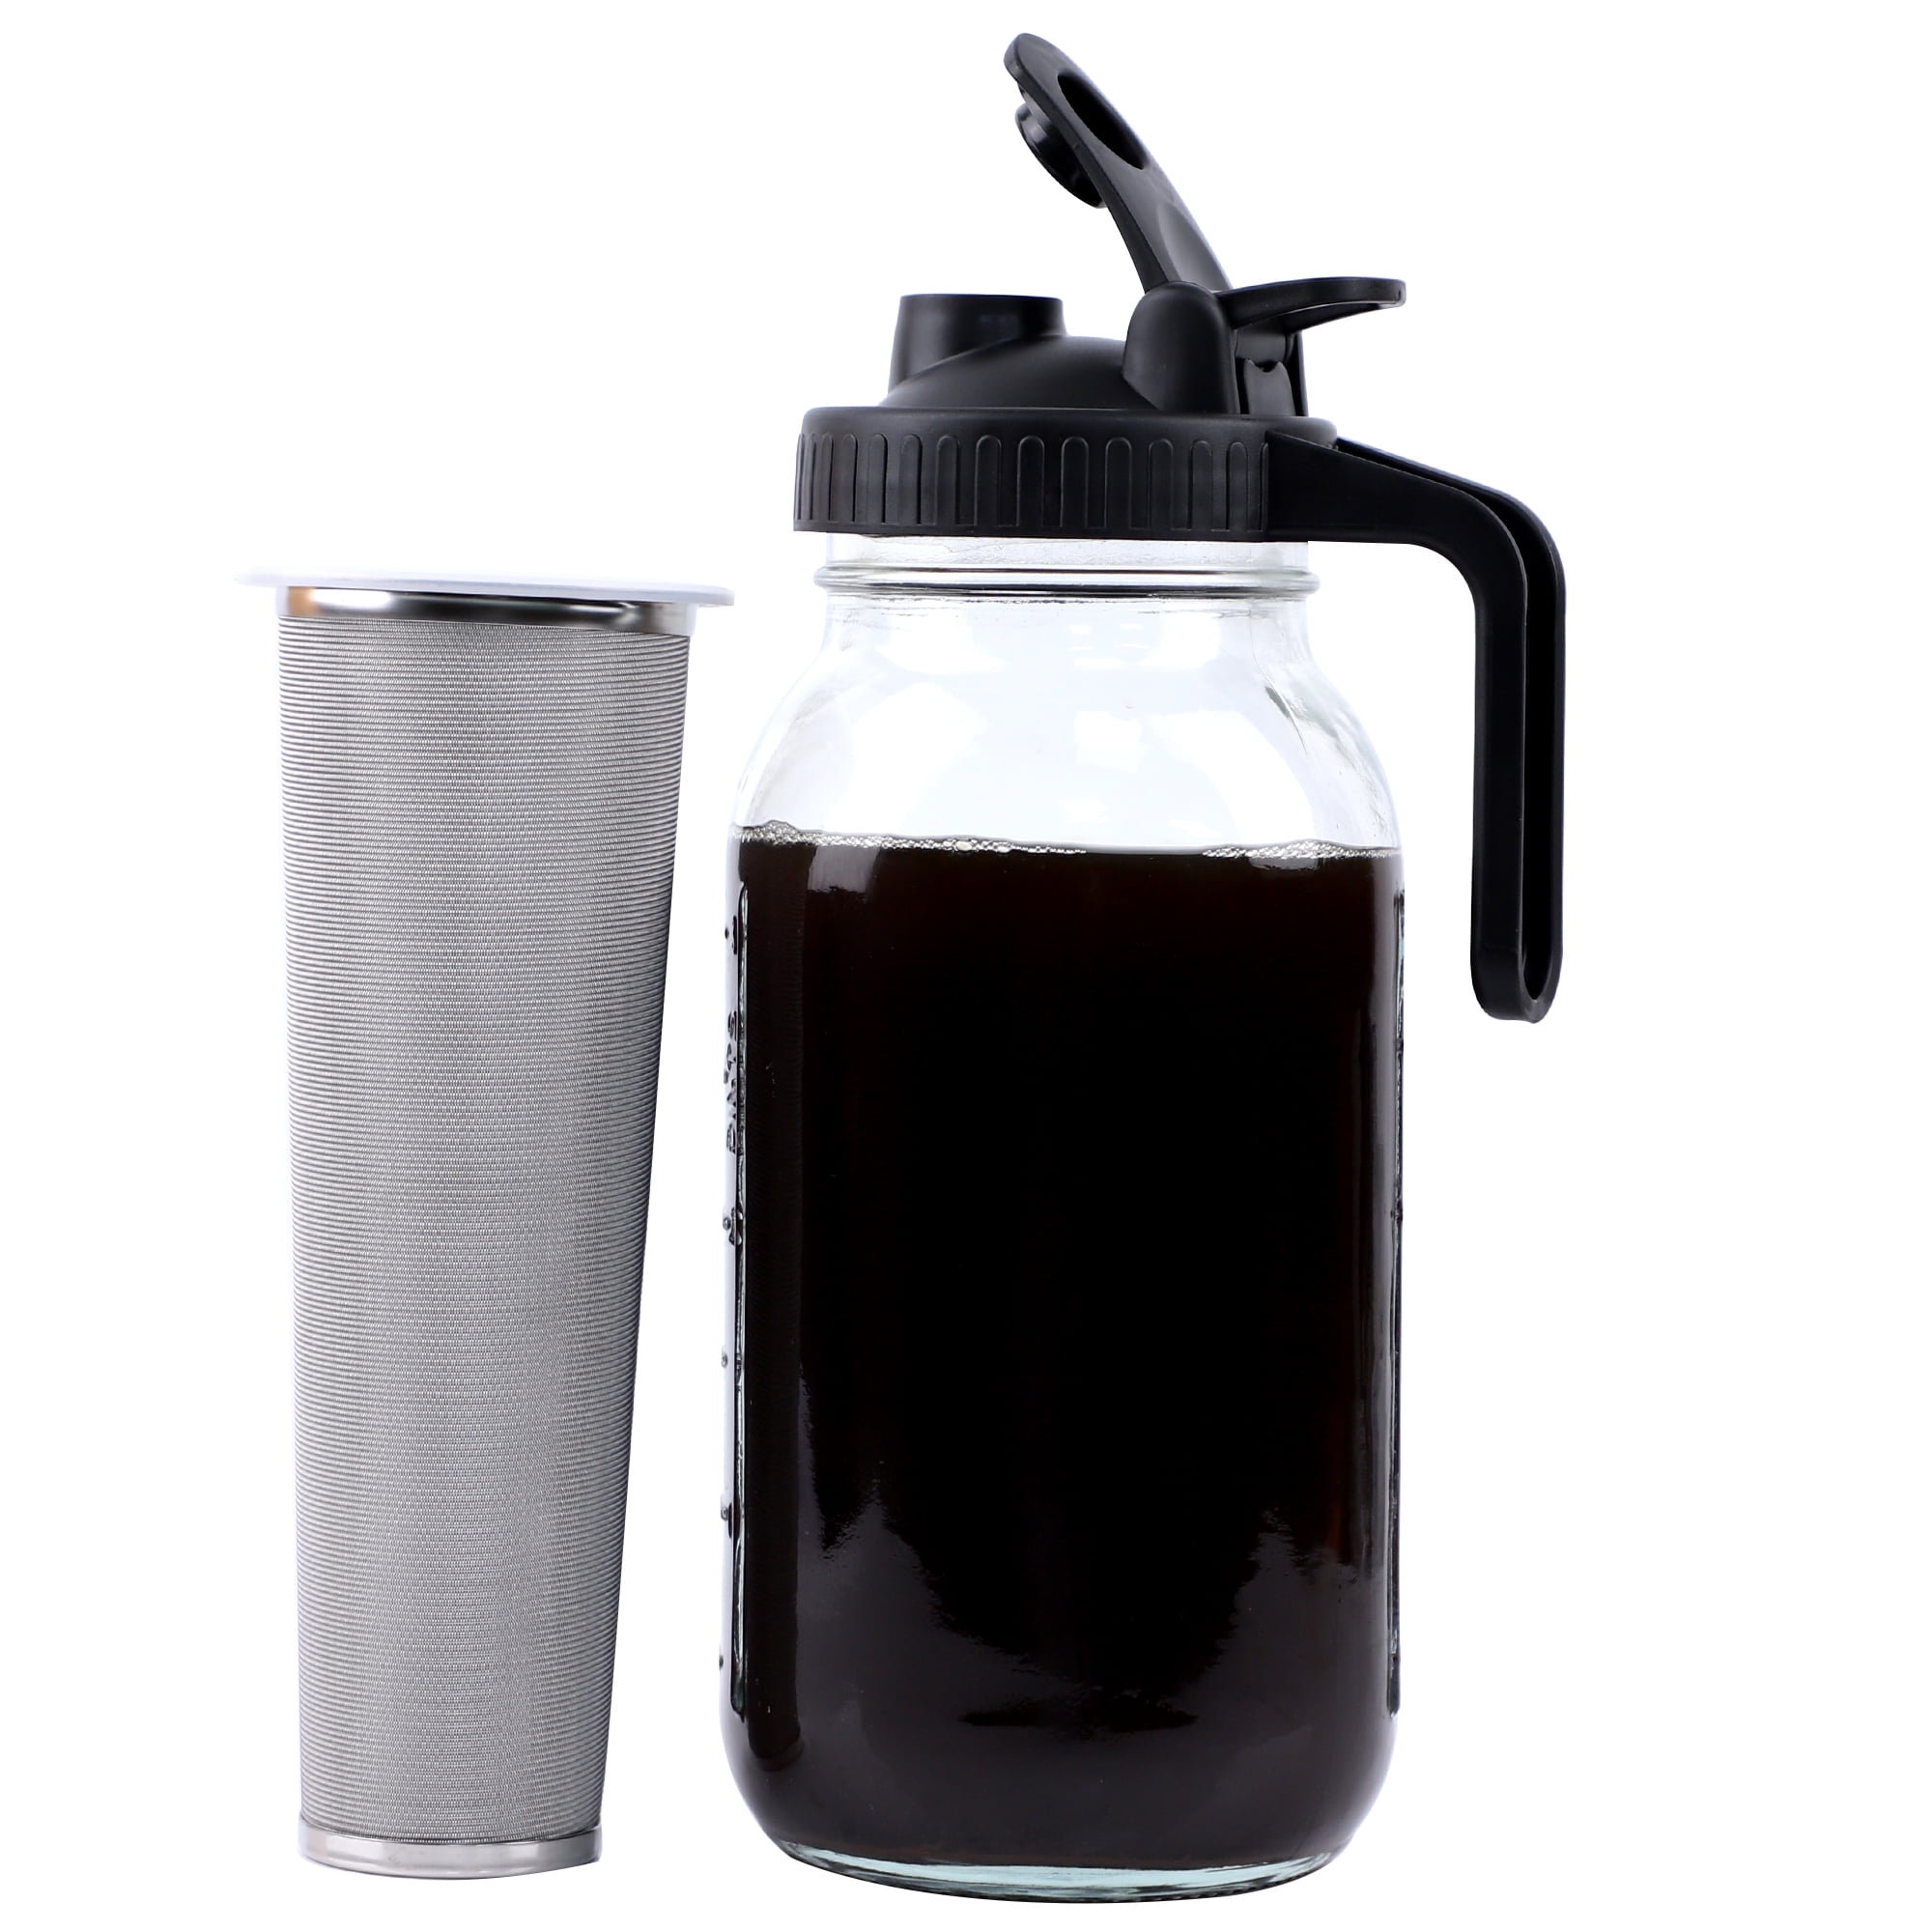 Cold Brew Coffee Maker Pitcher, 64 Oz Heavy Duty Wide Mouth Glass Mason Jar  pour spout Lid with Stainless Steel Filter for Iced Coffee, Ice Lemonade